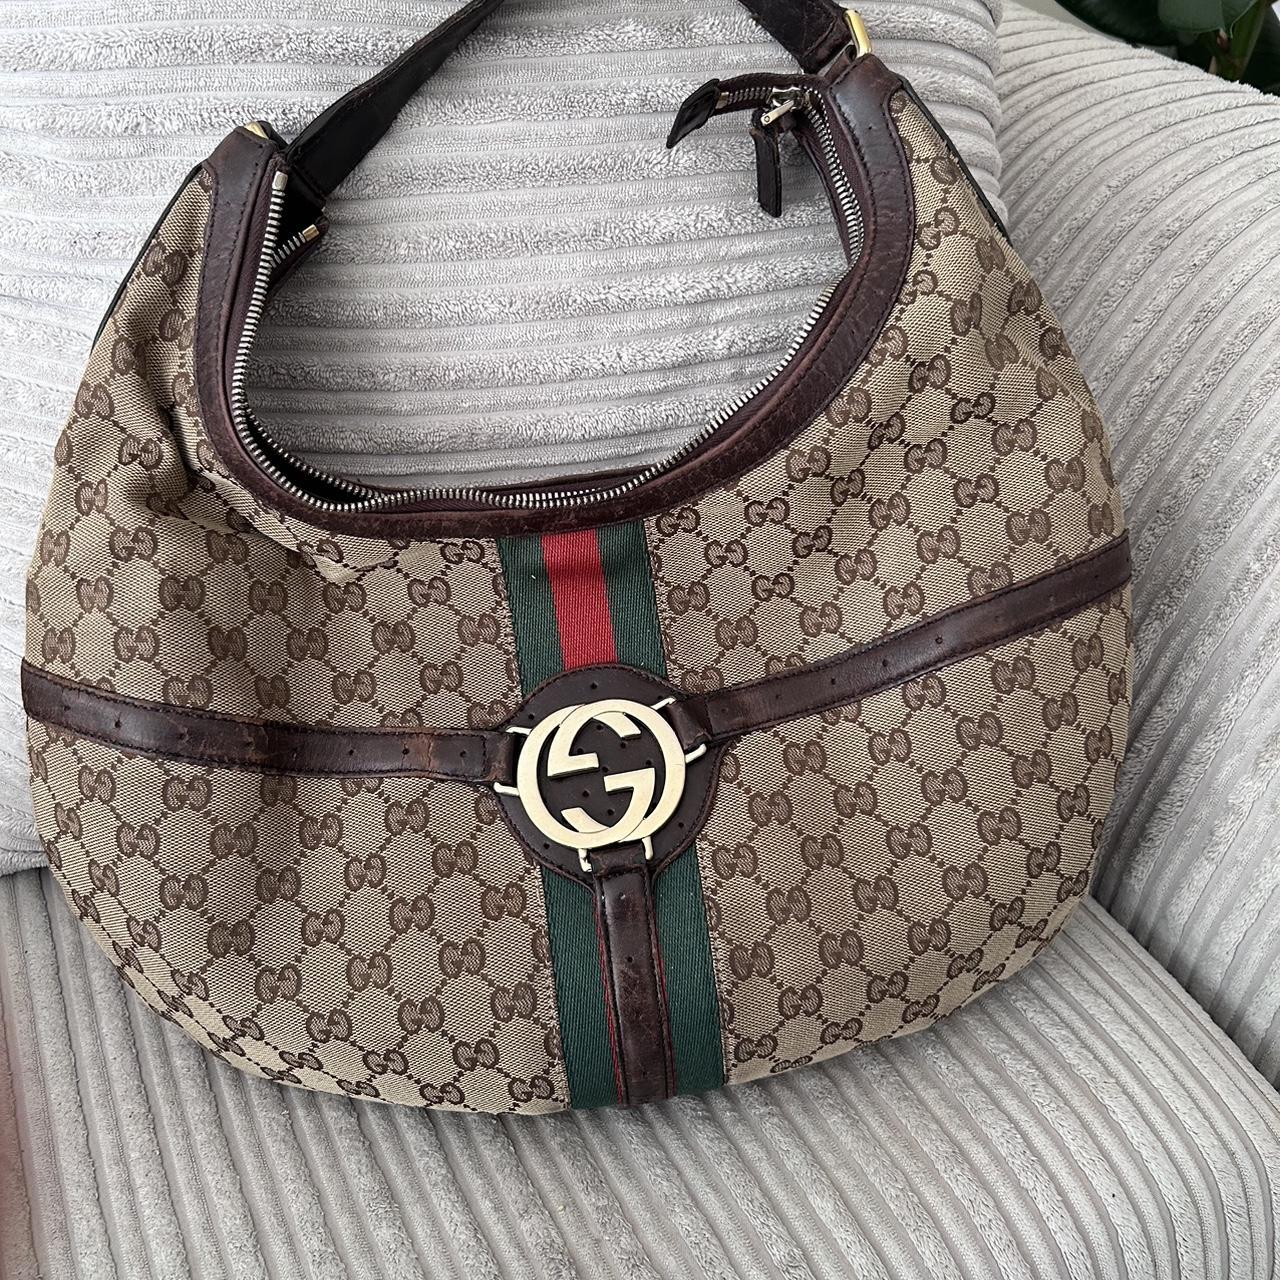 Vintage Gucci bag still in very good use, can hold... - Depop